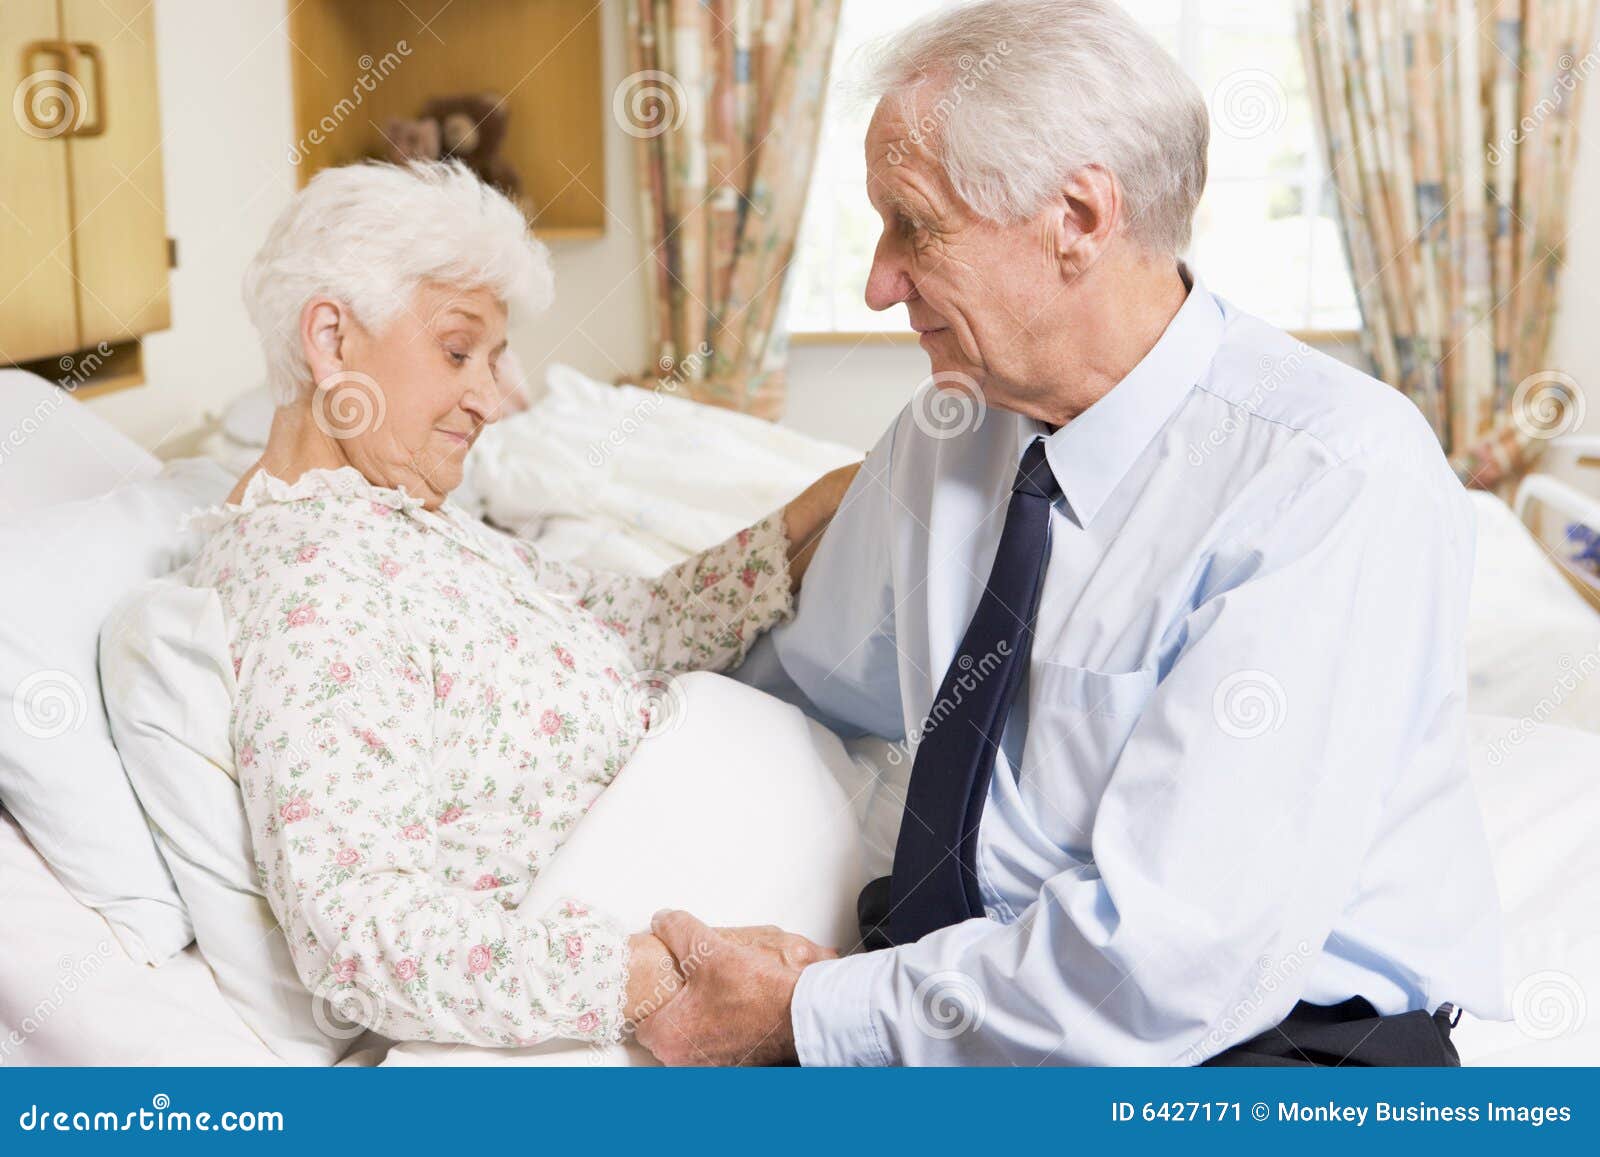 Senior Man Visiting His Wife in Hospital Stock Image